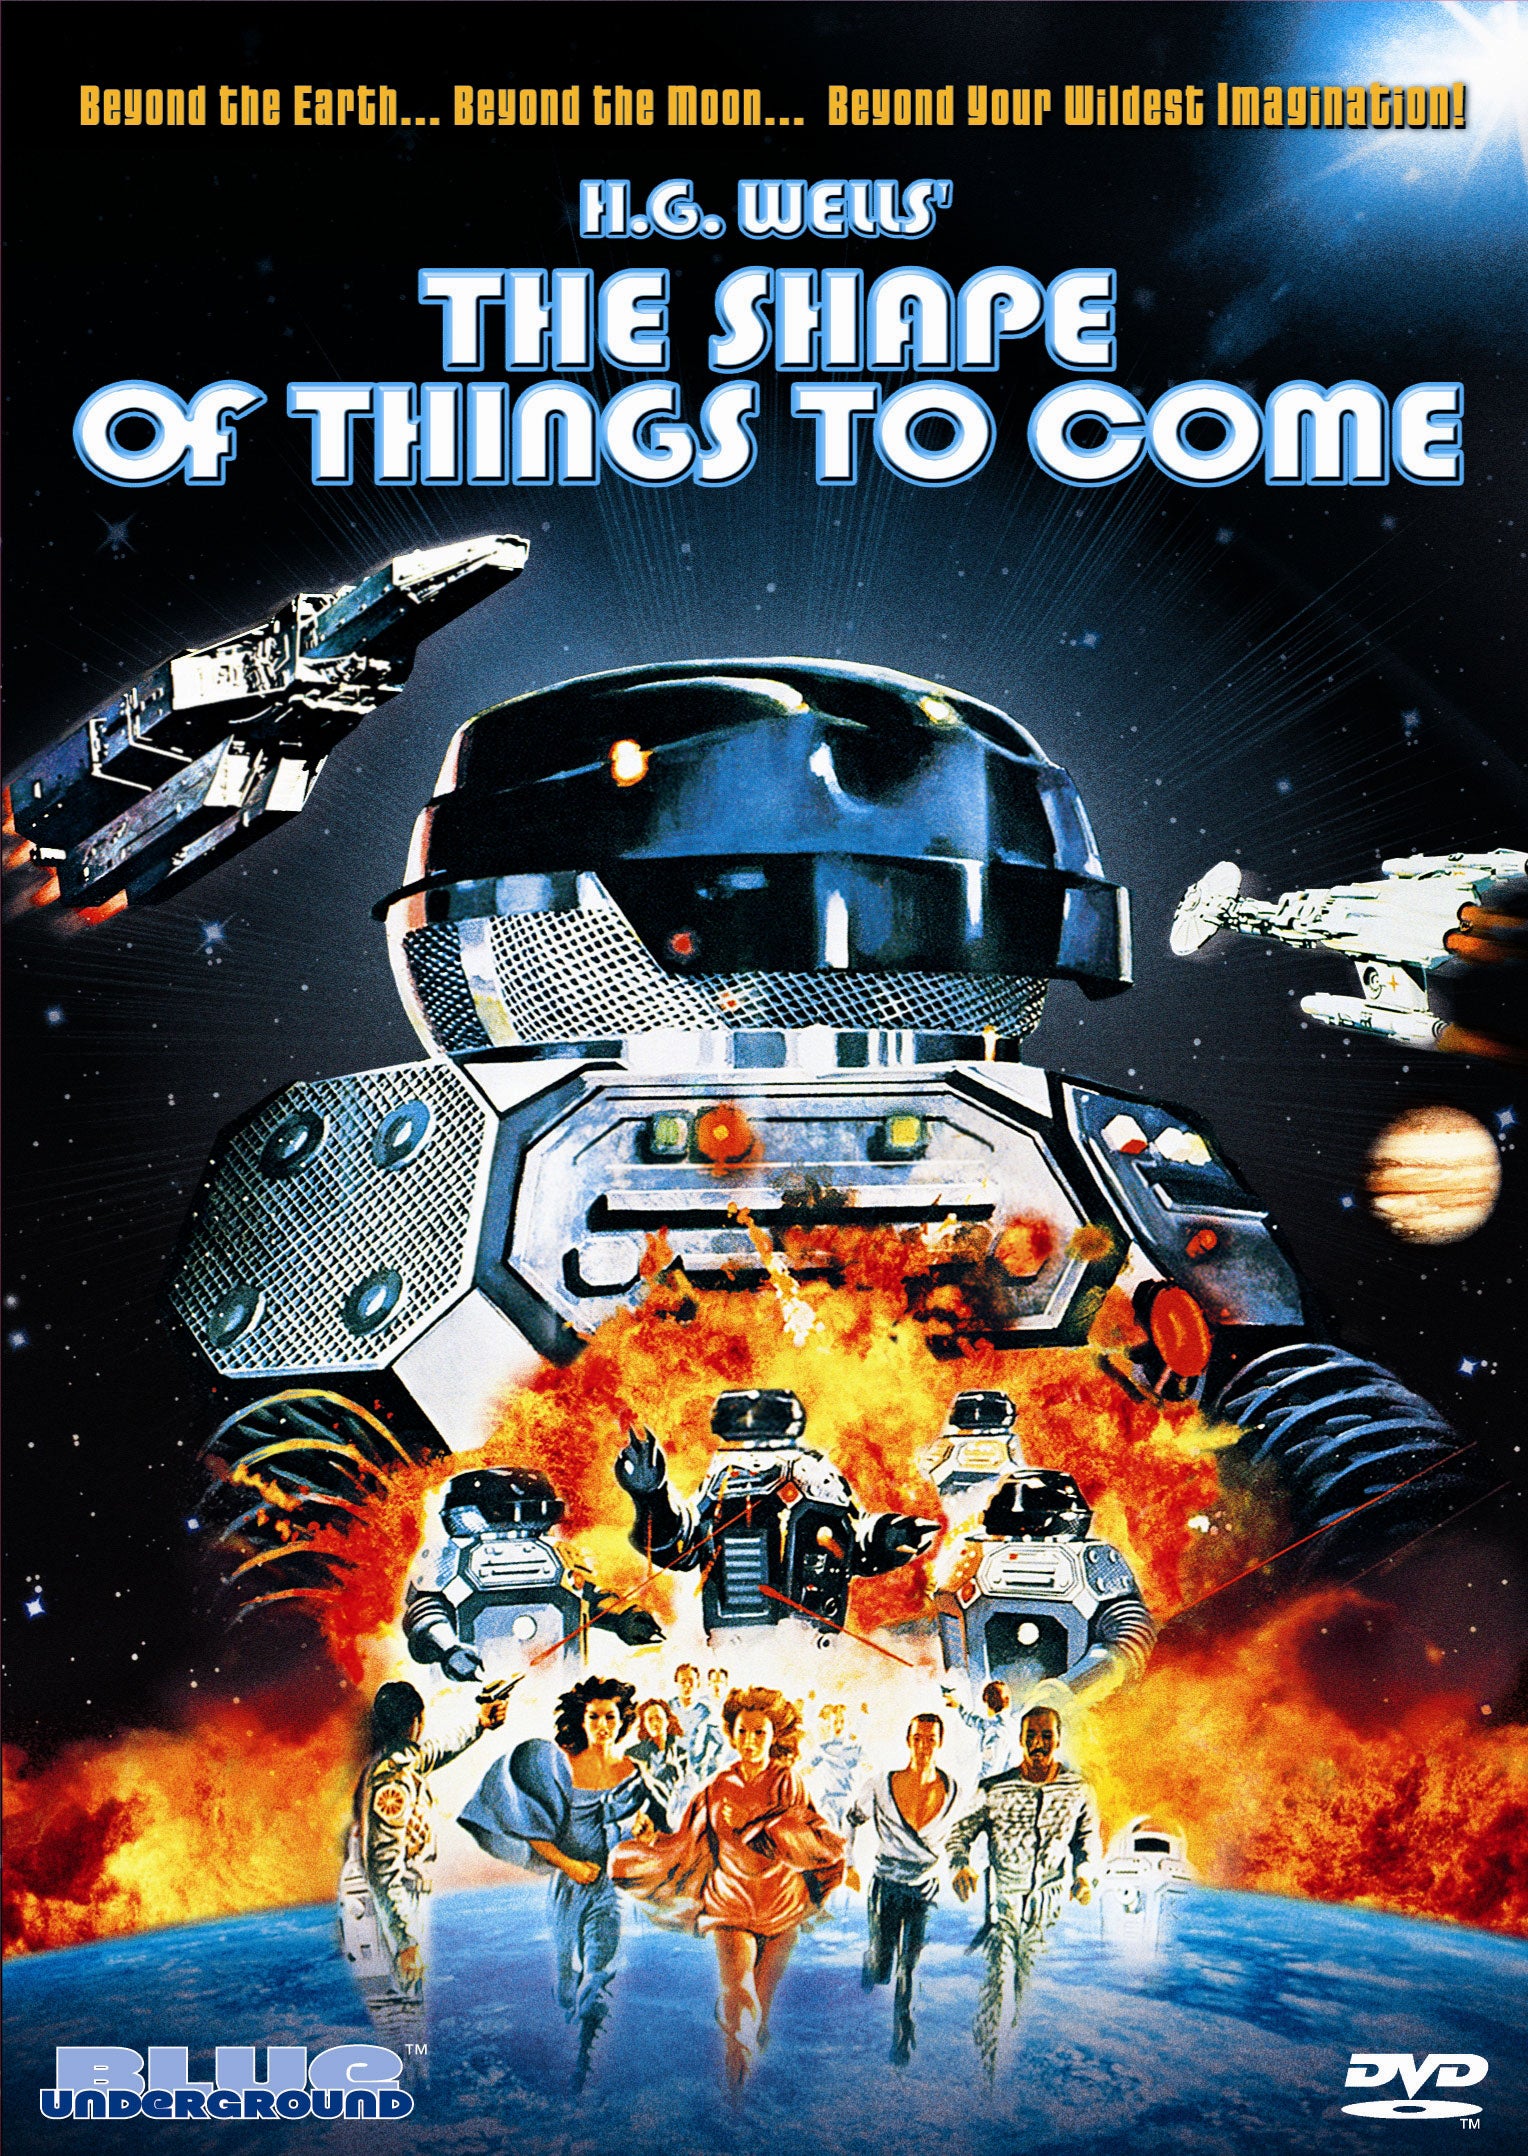 THE SHAPE OF THINGS TO COME DVD